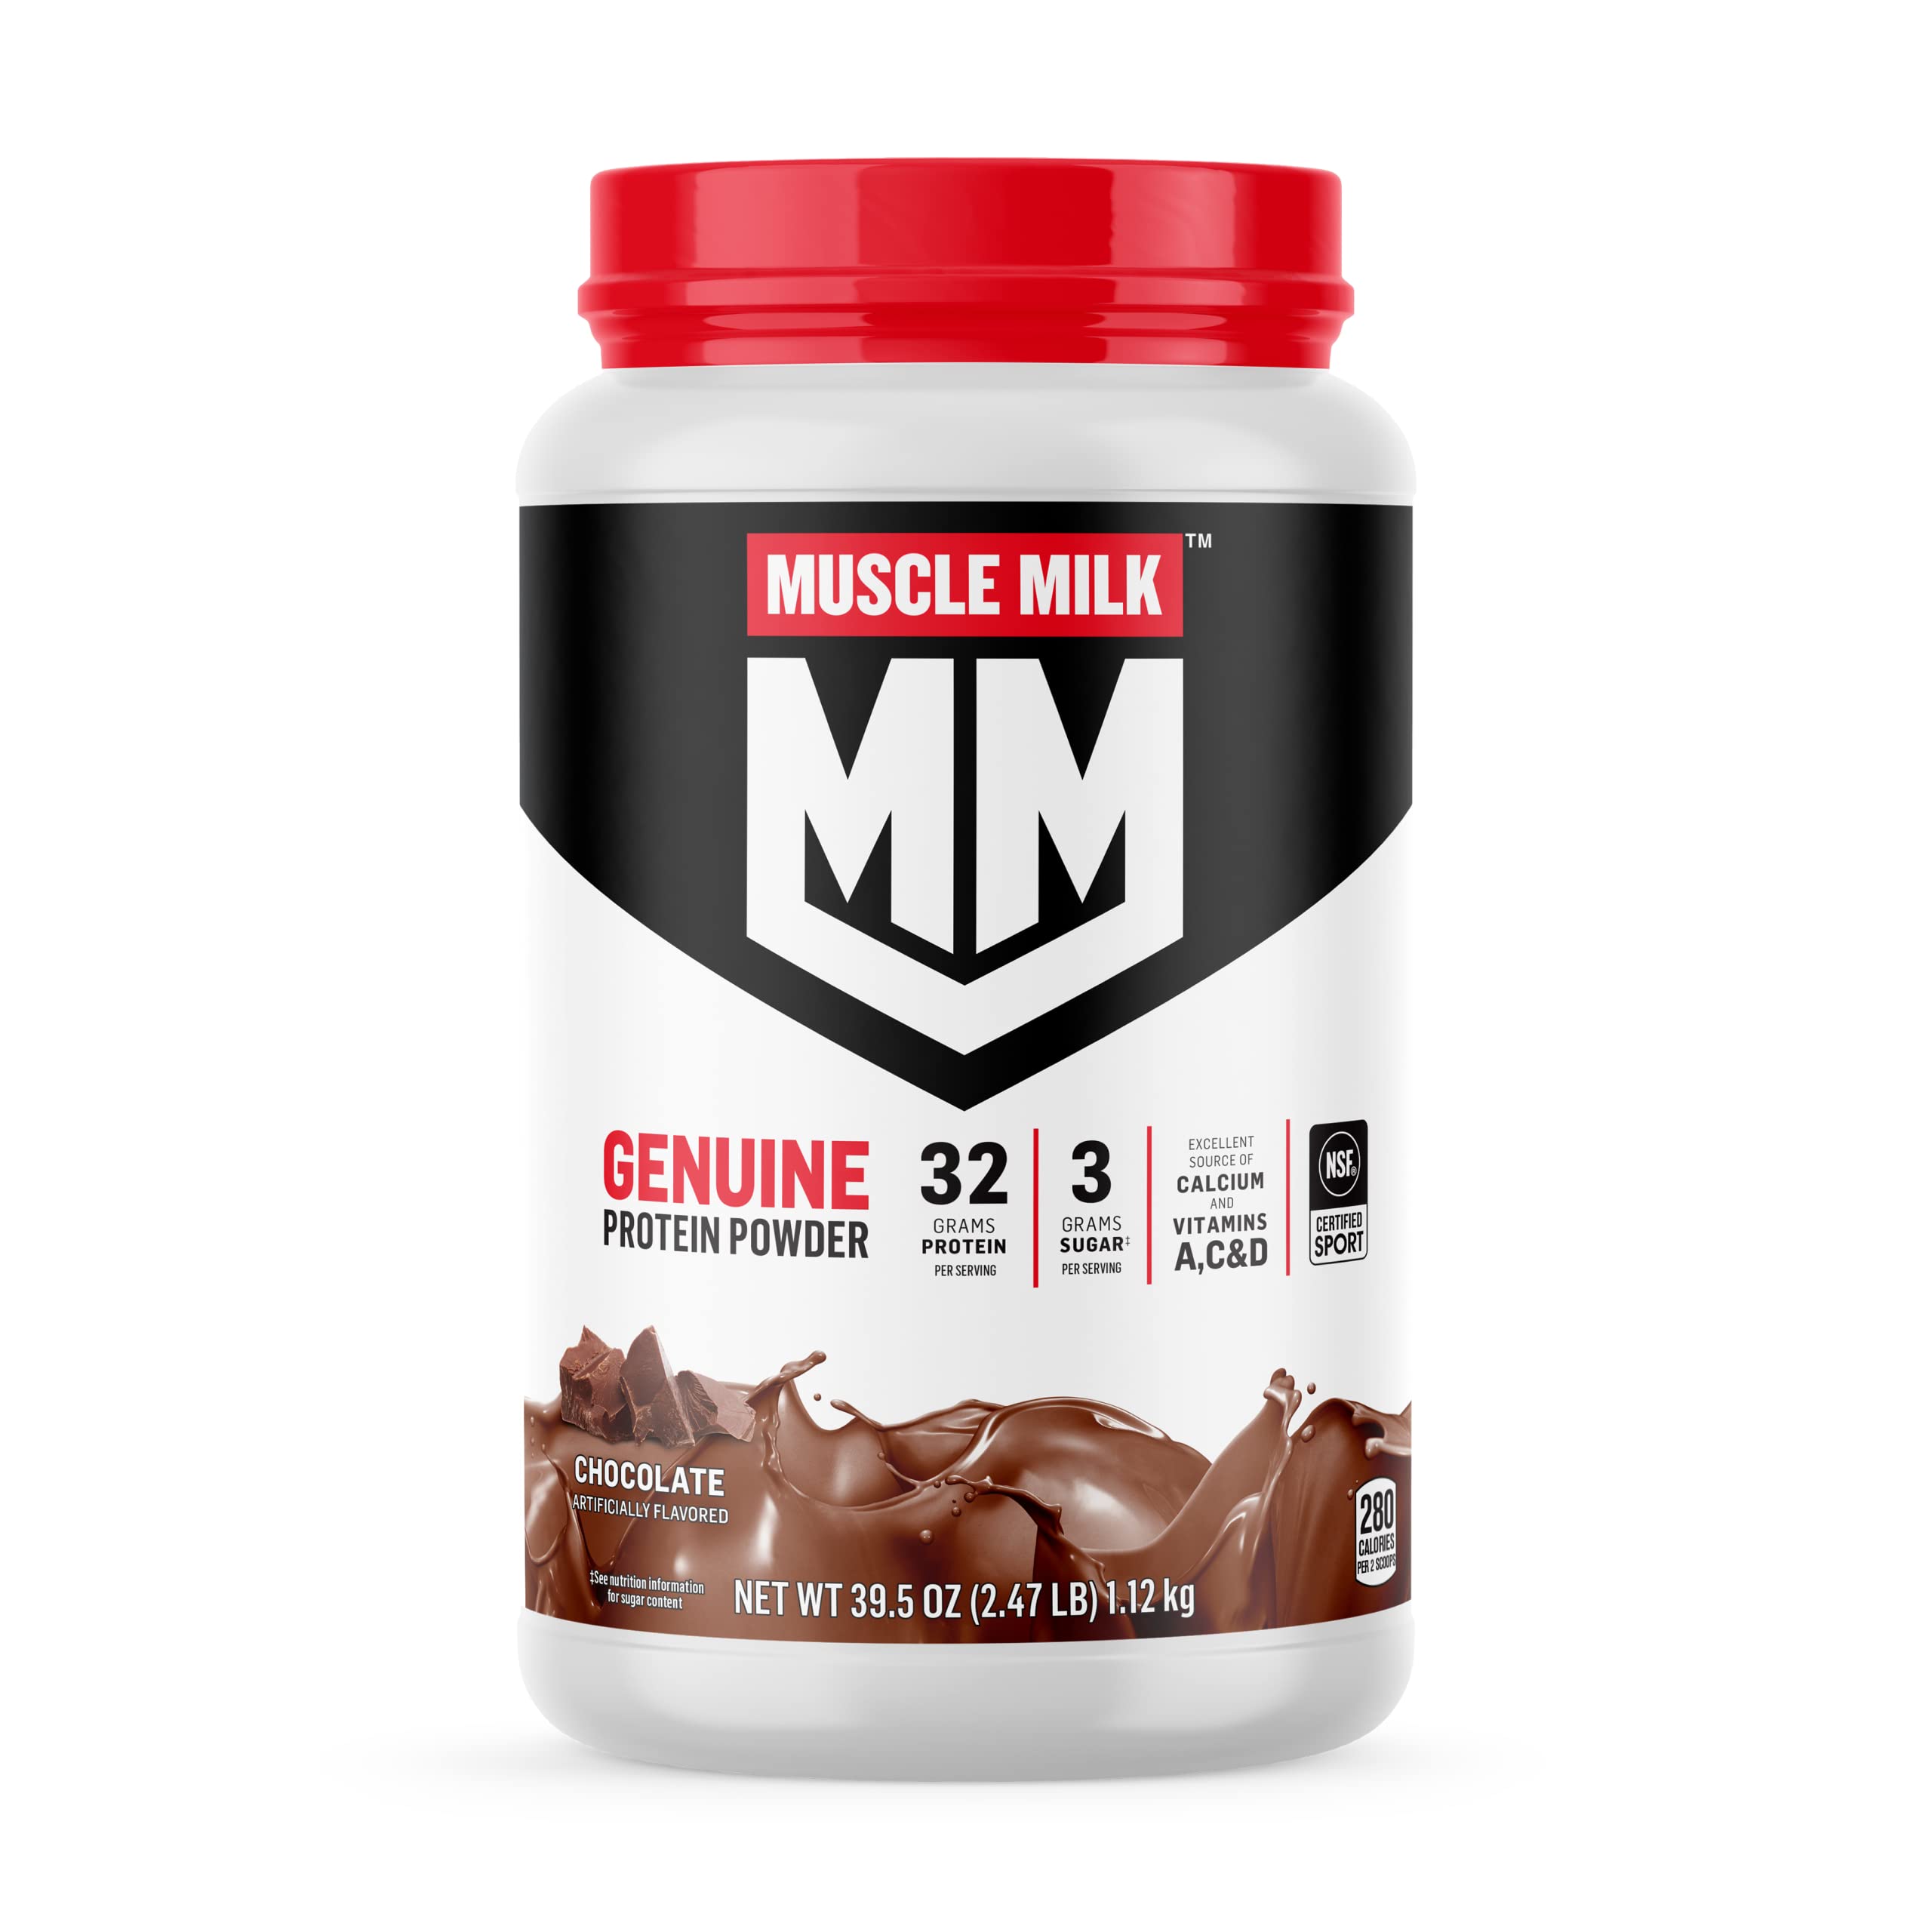 Book Cover Muscle Milk Genuine Protein Powder, Chocolate, 2.47 Pound, 16 Servings, 32g Protein, 3g Sugar, Calcium, Vitamins A, C & D, NSF Certified for Sport, Energizing Snack, Packaging May Vary